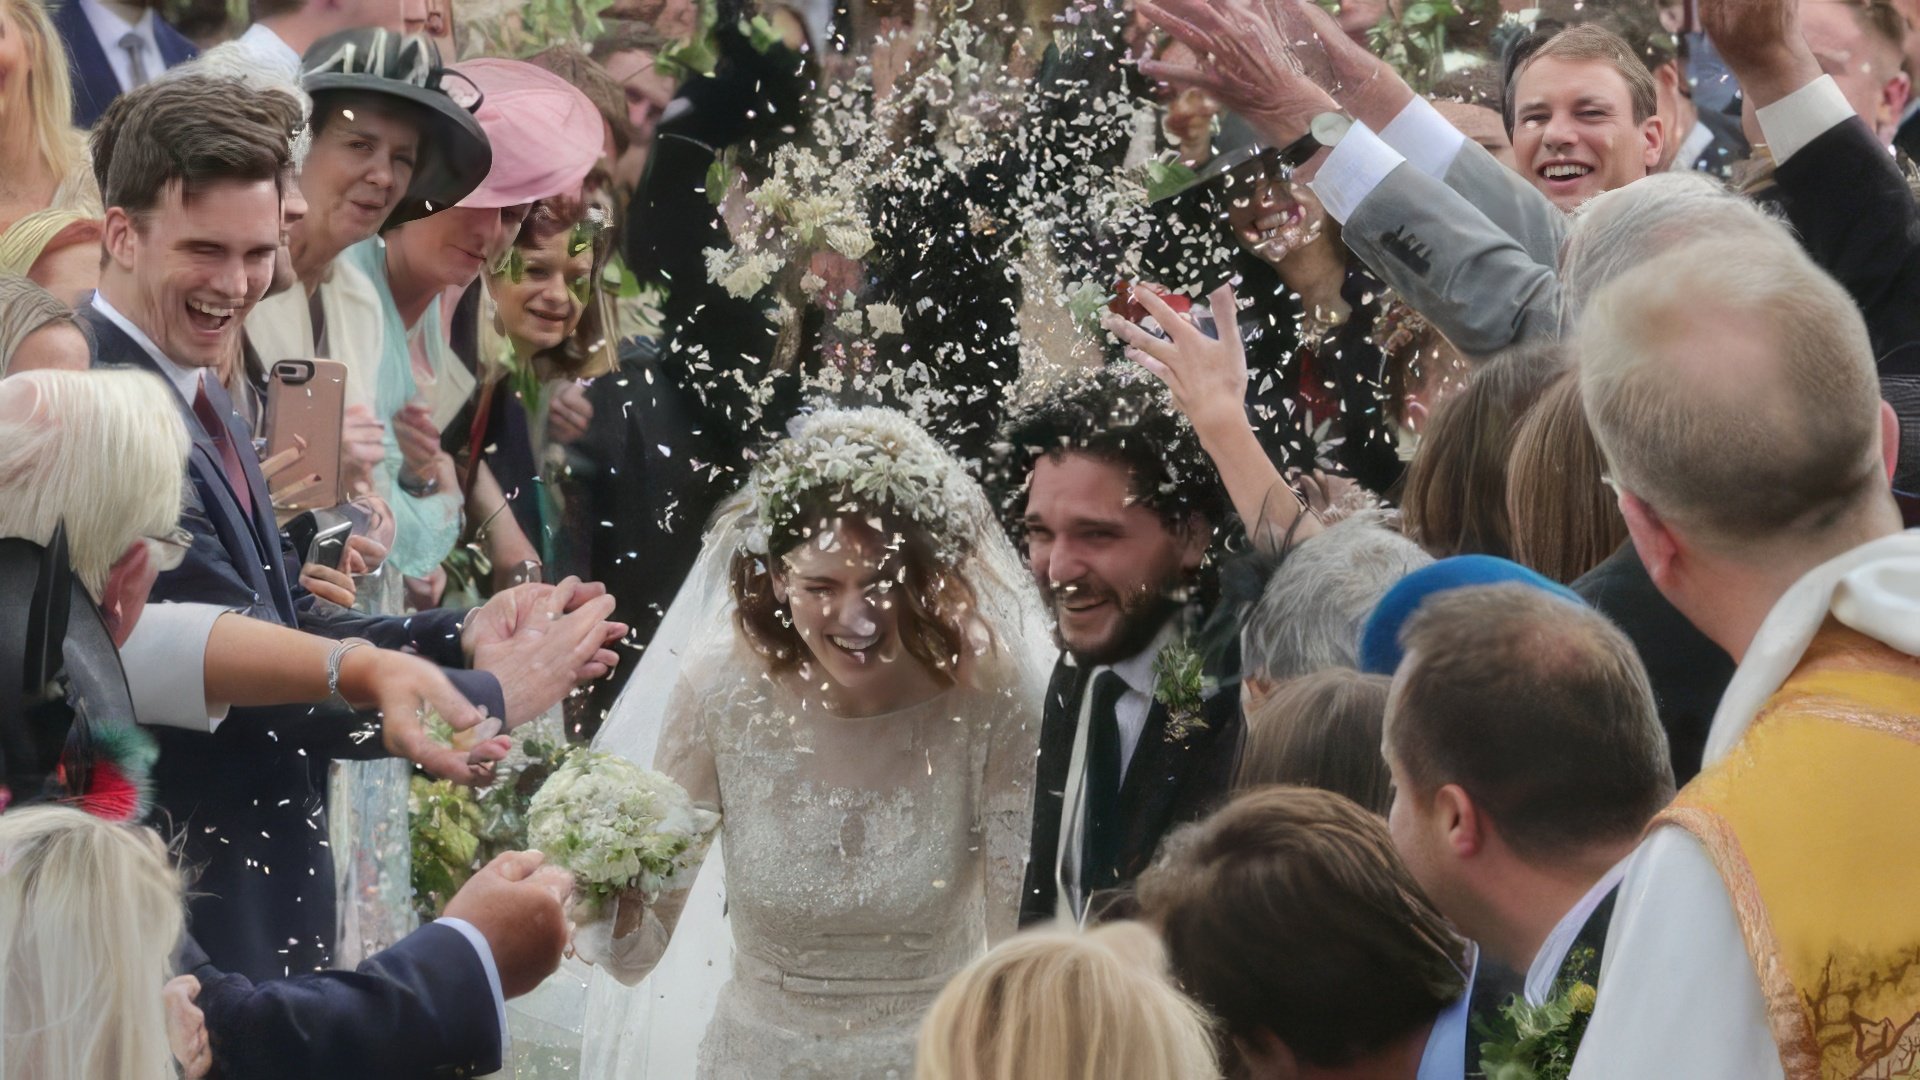 The wedding of Kit Harington and Rose Leslie